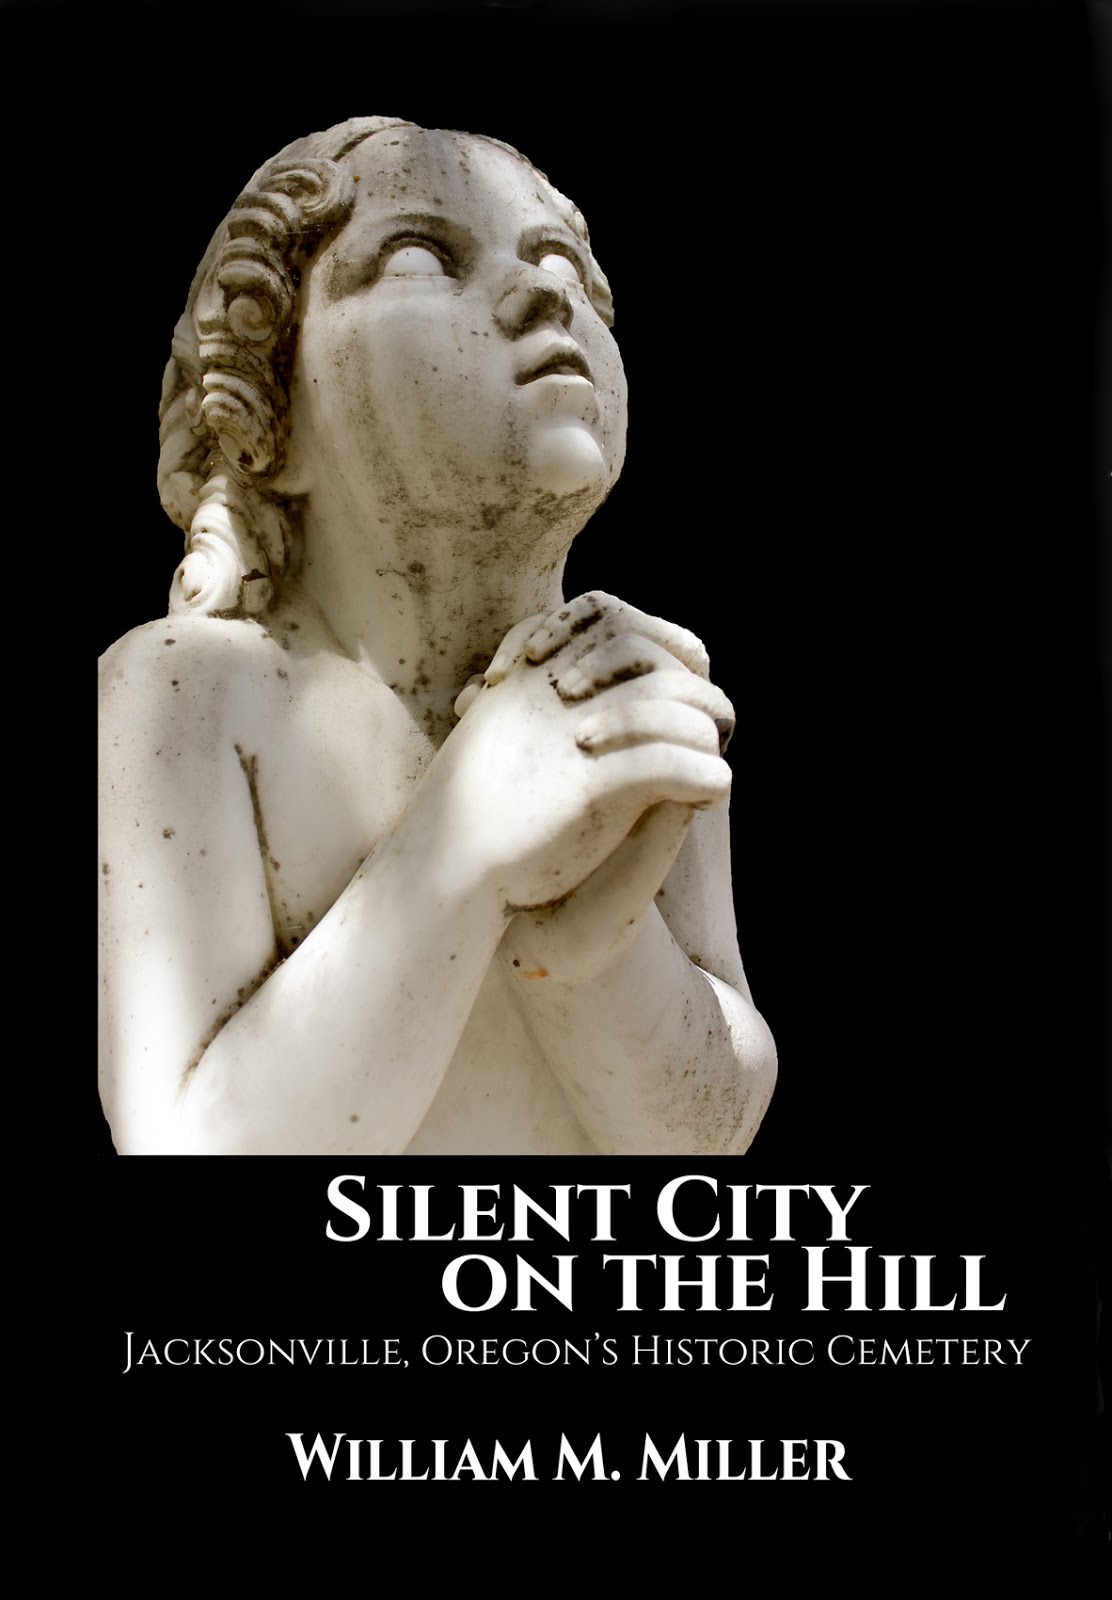 Silent City On the Hill